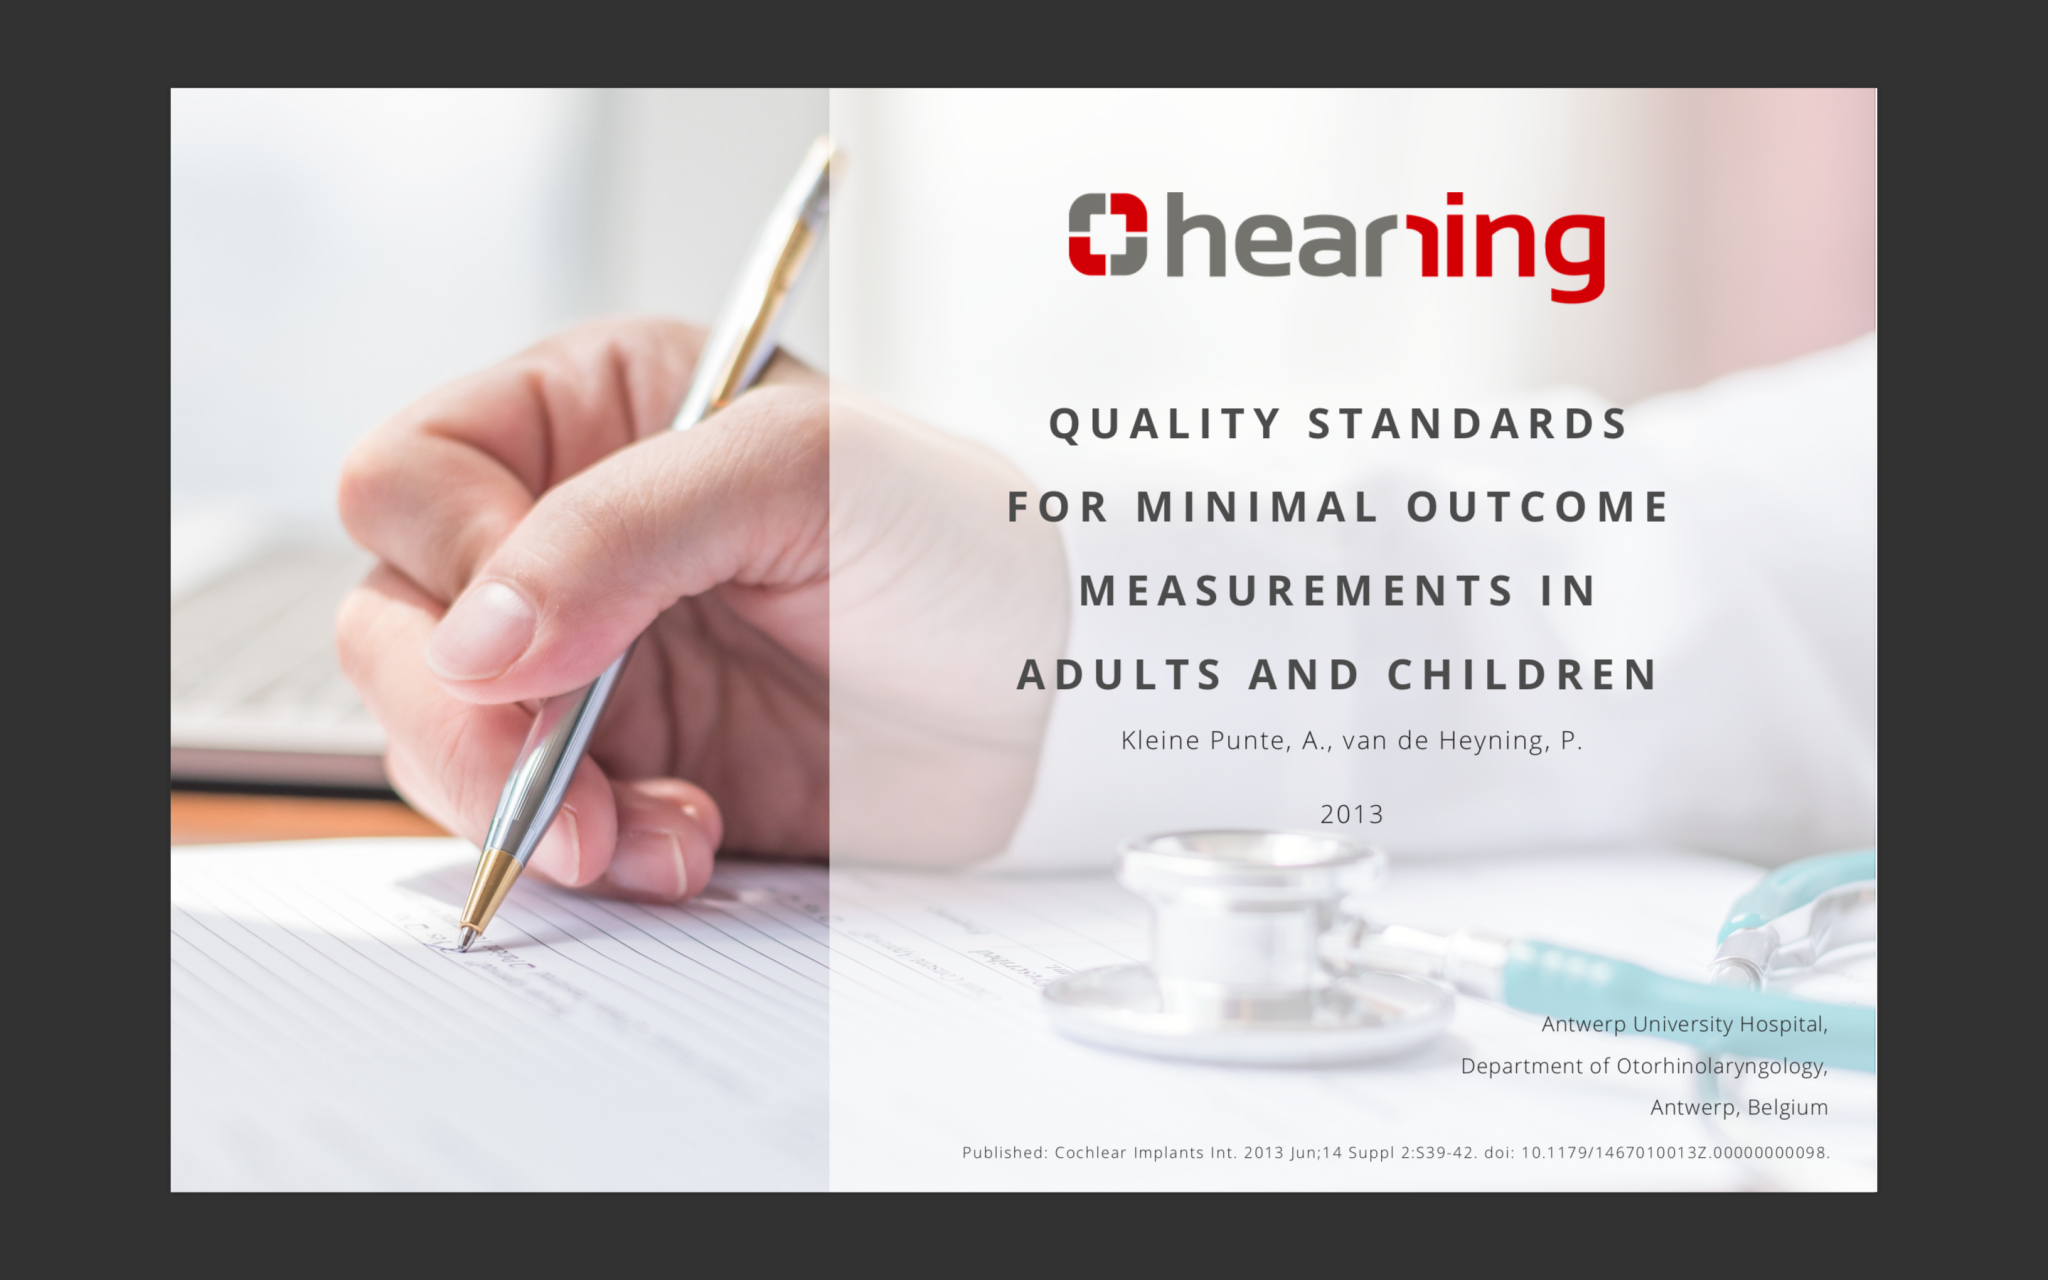 Minimal Outcome Measurements Quality Standards Hearring